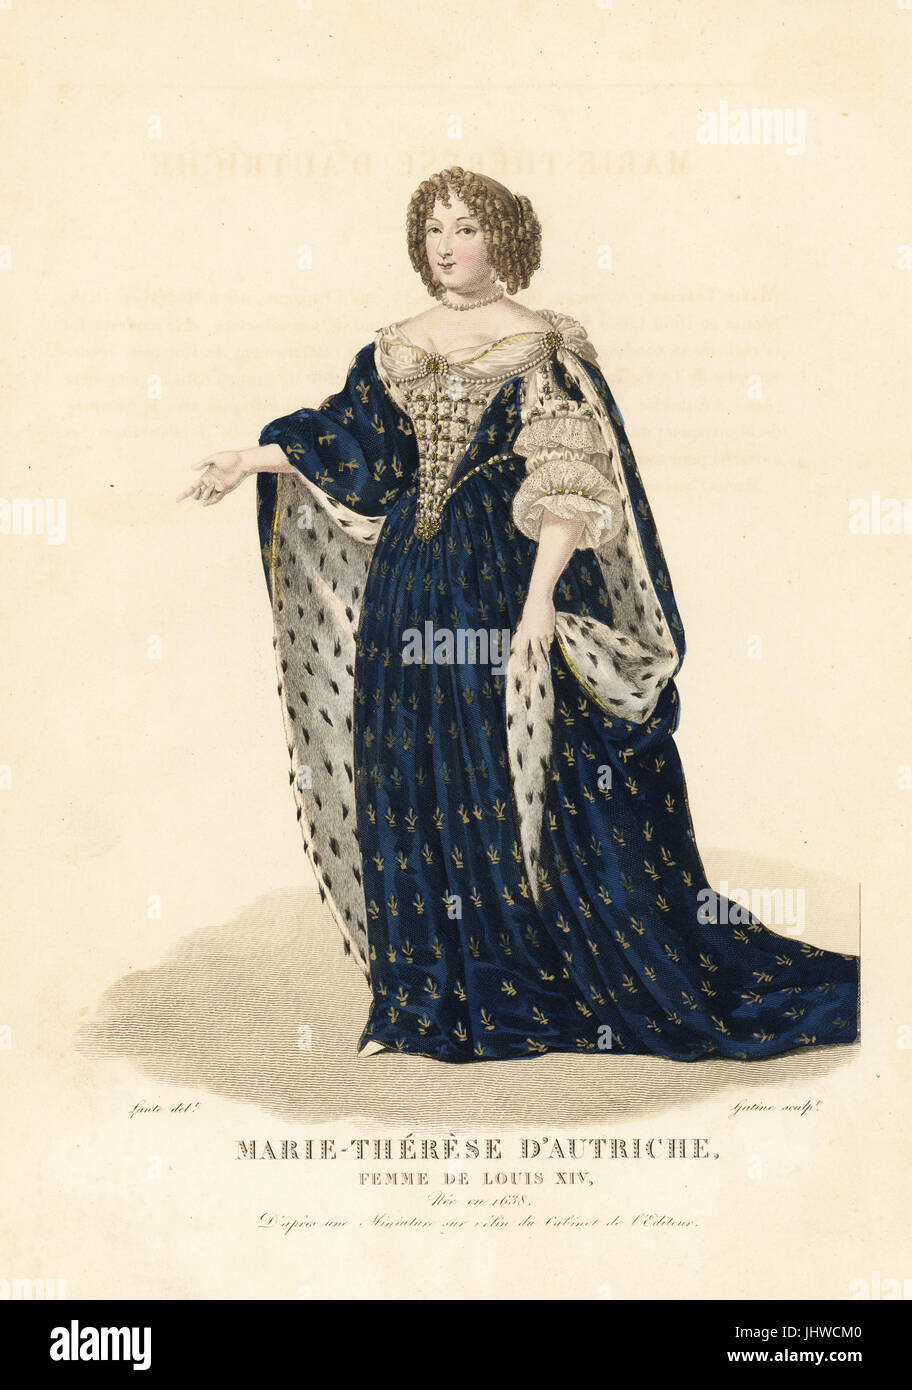 Maria Theresa of Spain, Queen of France, wife of King Louis XIV of France, 1638-1683. She wears her hair in ringlets, a pearl choker, a dress in blue velvet decorated with fleurs de lys and lined with ermine, lace sleeves, quilted bodice decorated with pearls. After a miniature in the editor's collection. Handcoloured copperplate engraving by Georges Jacques Gatine after an illustration by Louis Marie Lante from Galerie Francaise de Femmes Celebres, Paris, 1827. Stock Photo